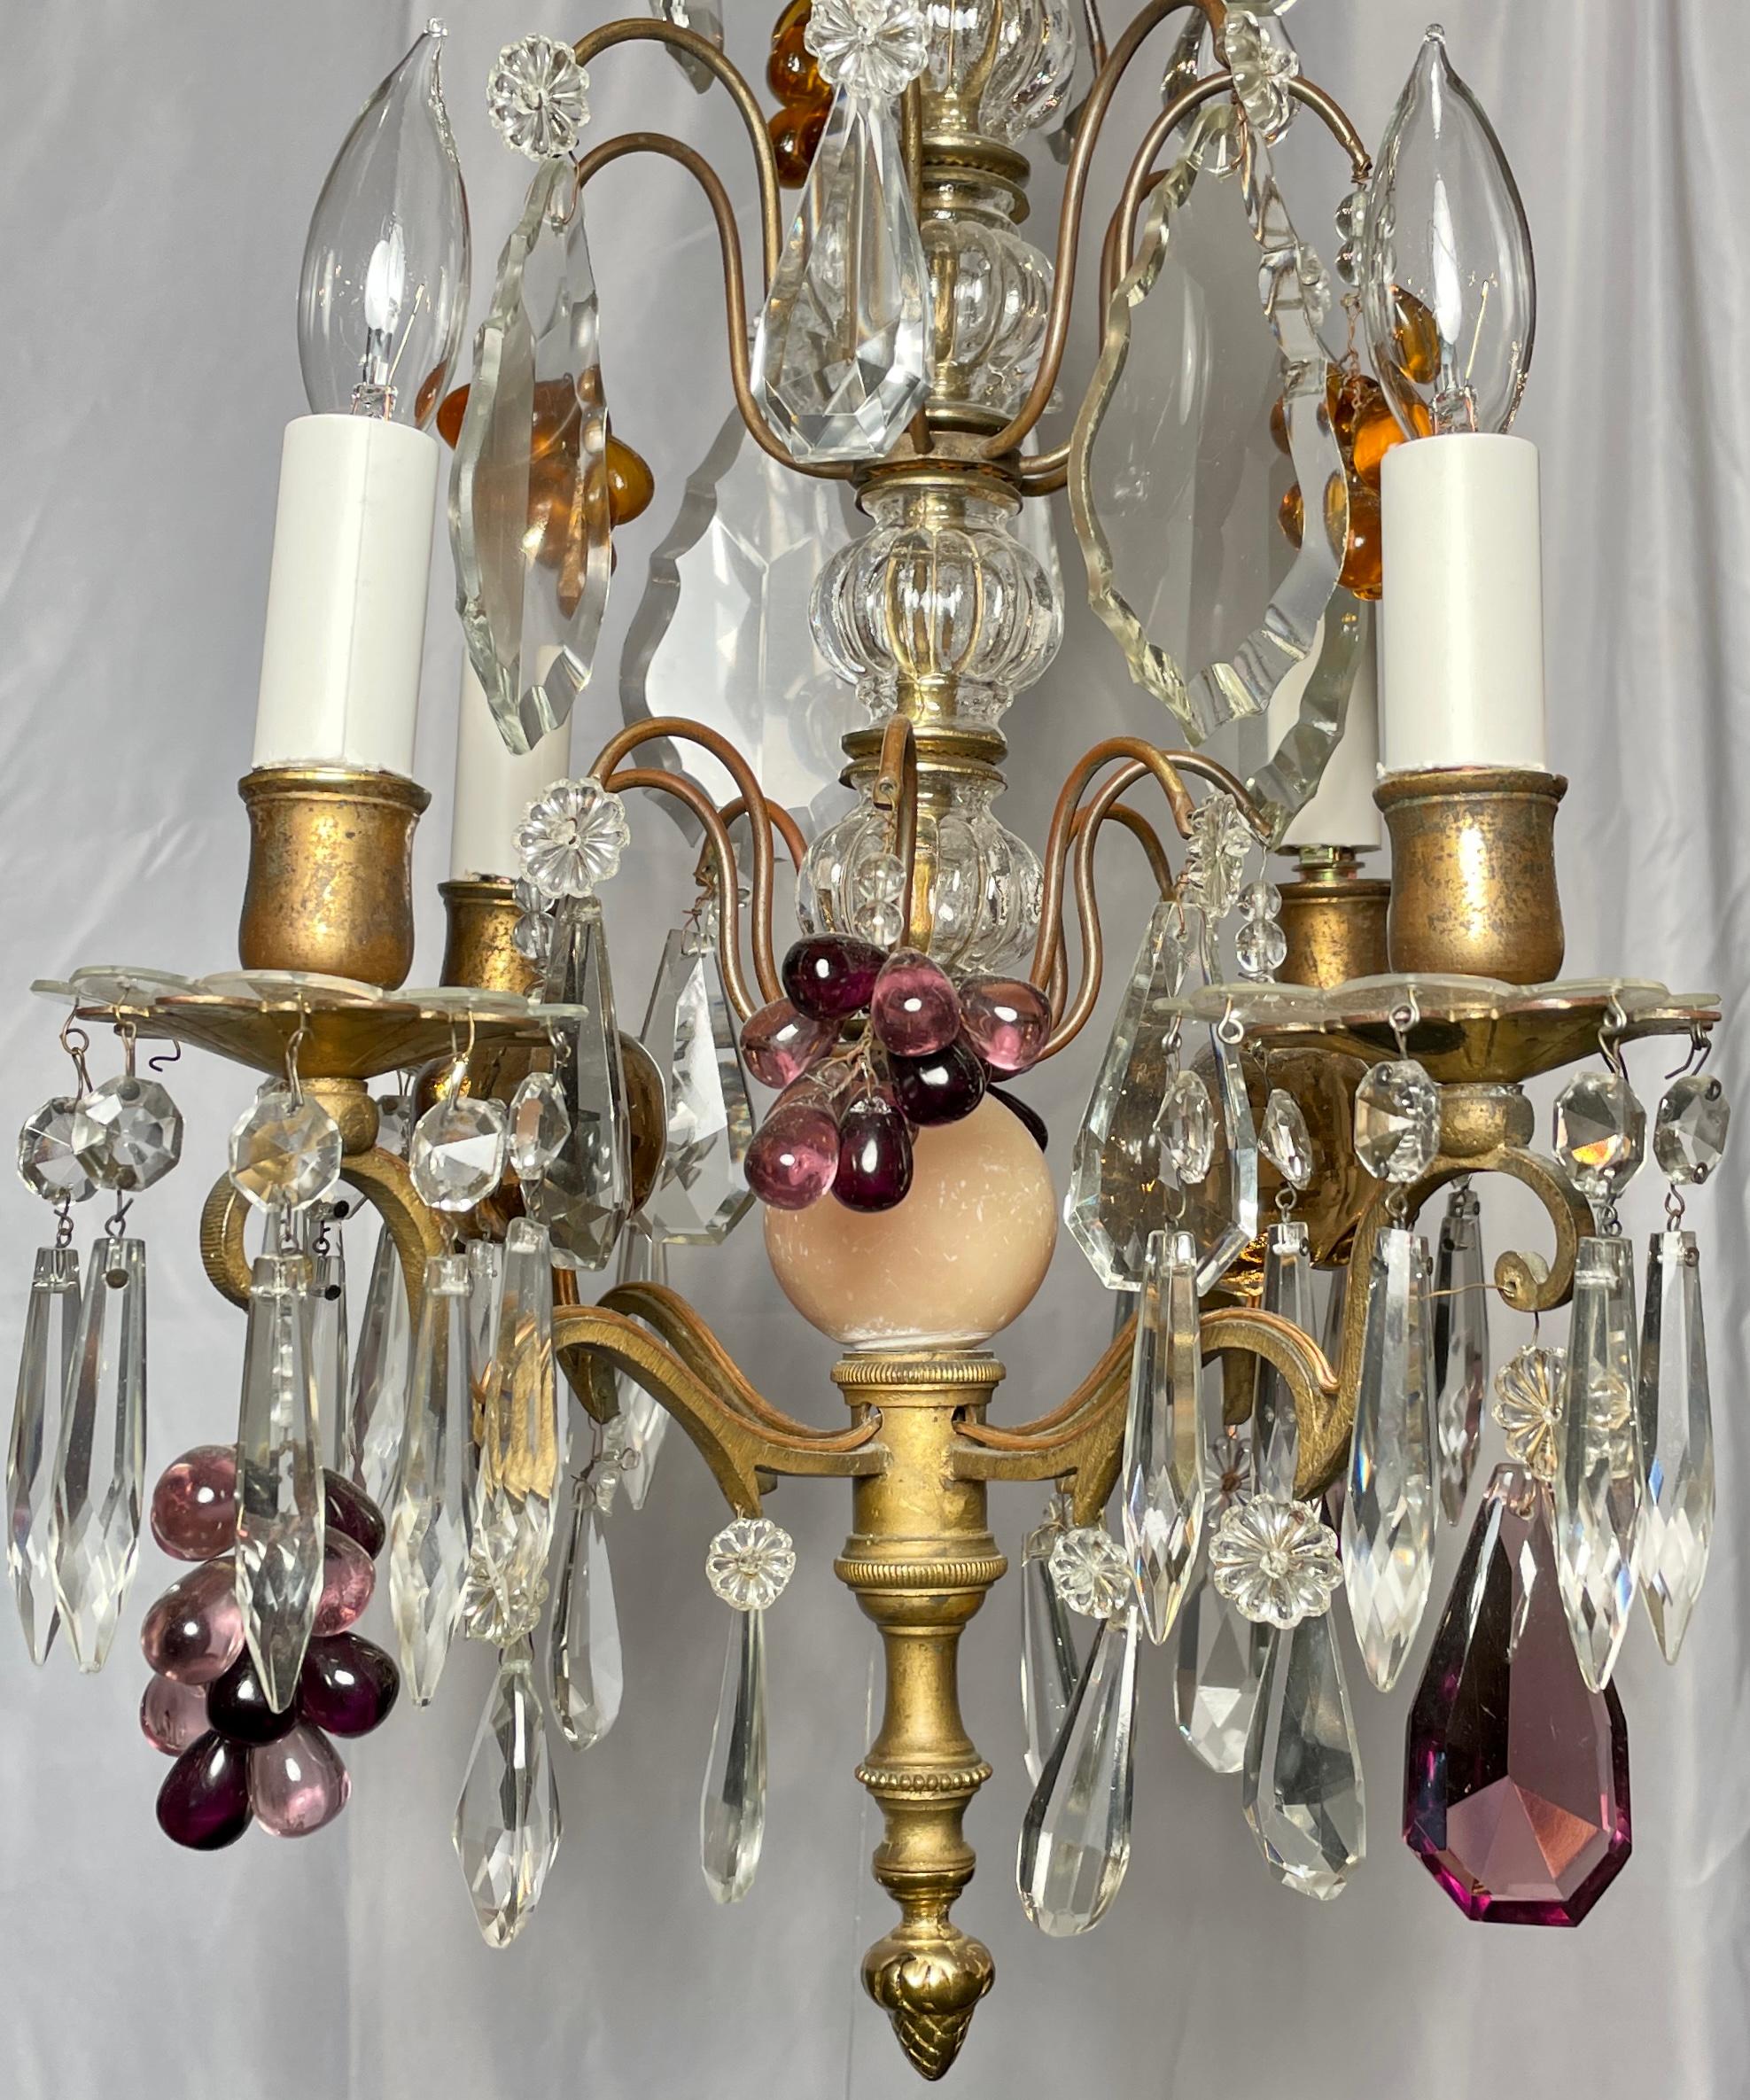 Petite Antique French multi-colored baccarat crystal and gold bronze 4 light chandelier, circa 1900.